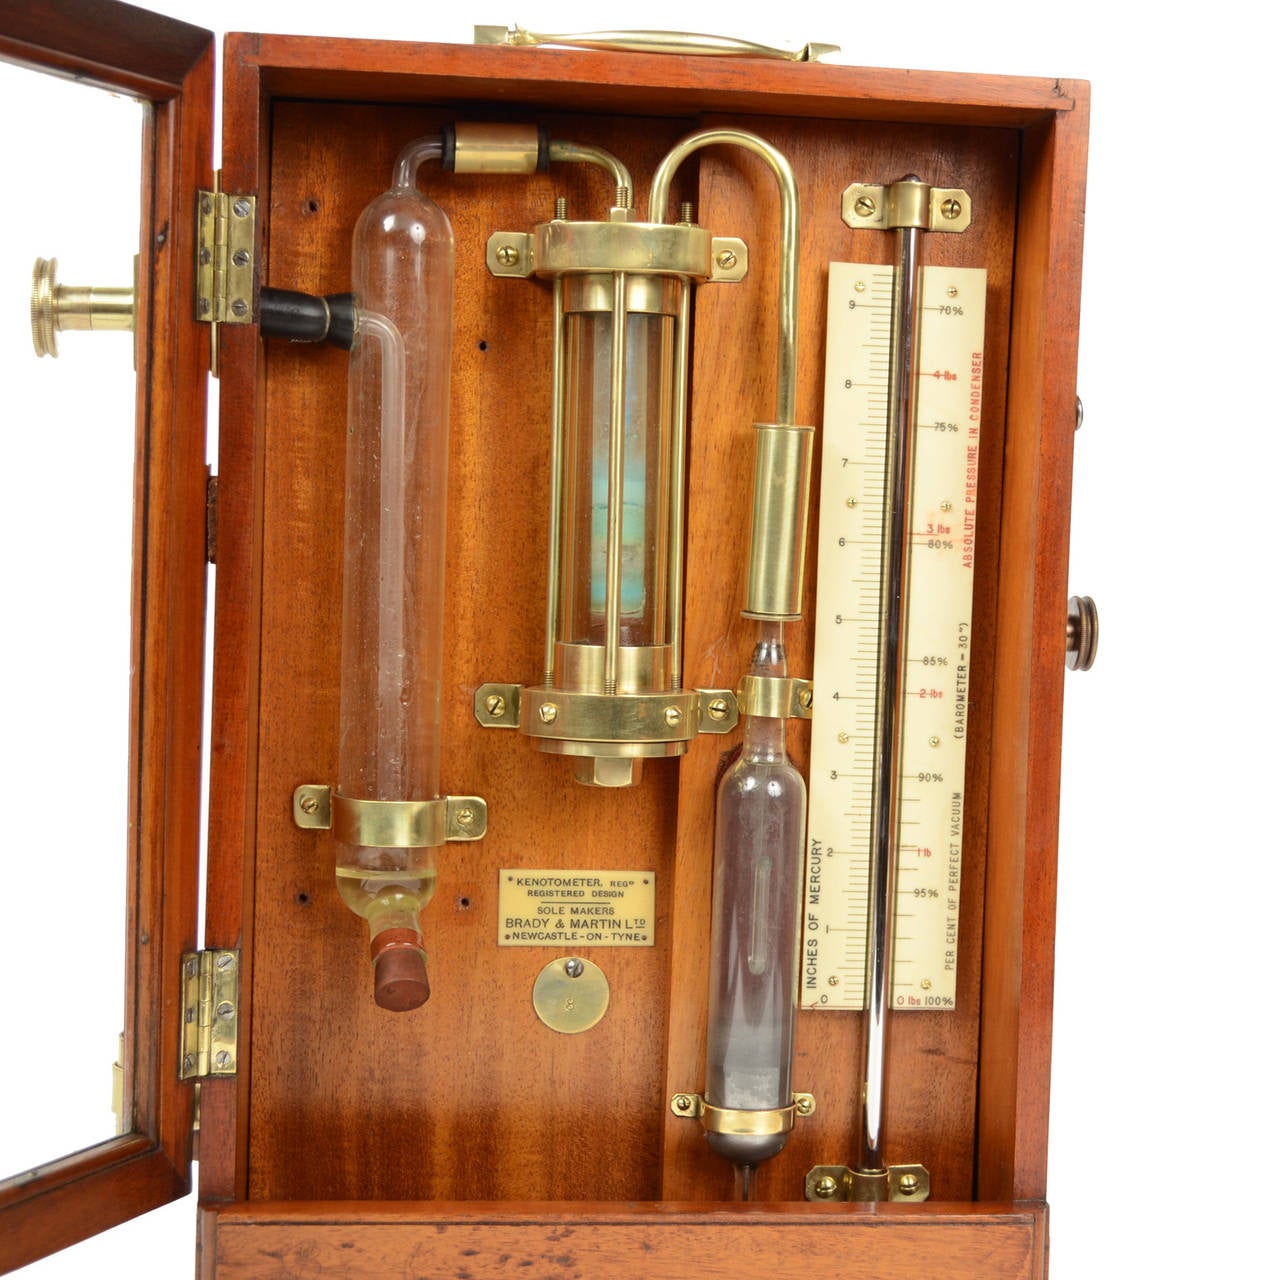 Kenotometer signed Brady & Martin Ltd Newcastle-on-Tyne, early 1900. It is an instrument used on a ship to measure the pressure in the condensers of steam turbines. It consists of a system of pipes and vials, glass and brass, placed in teak and